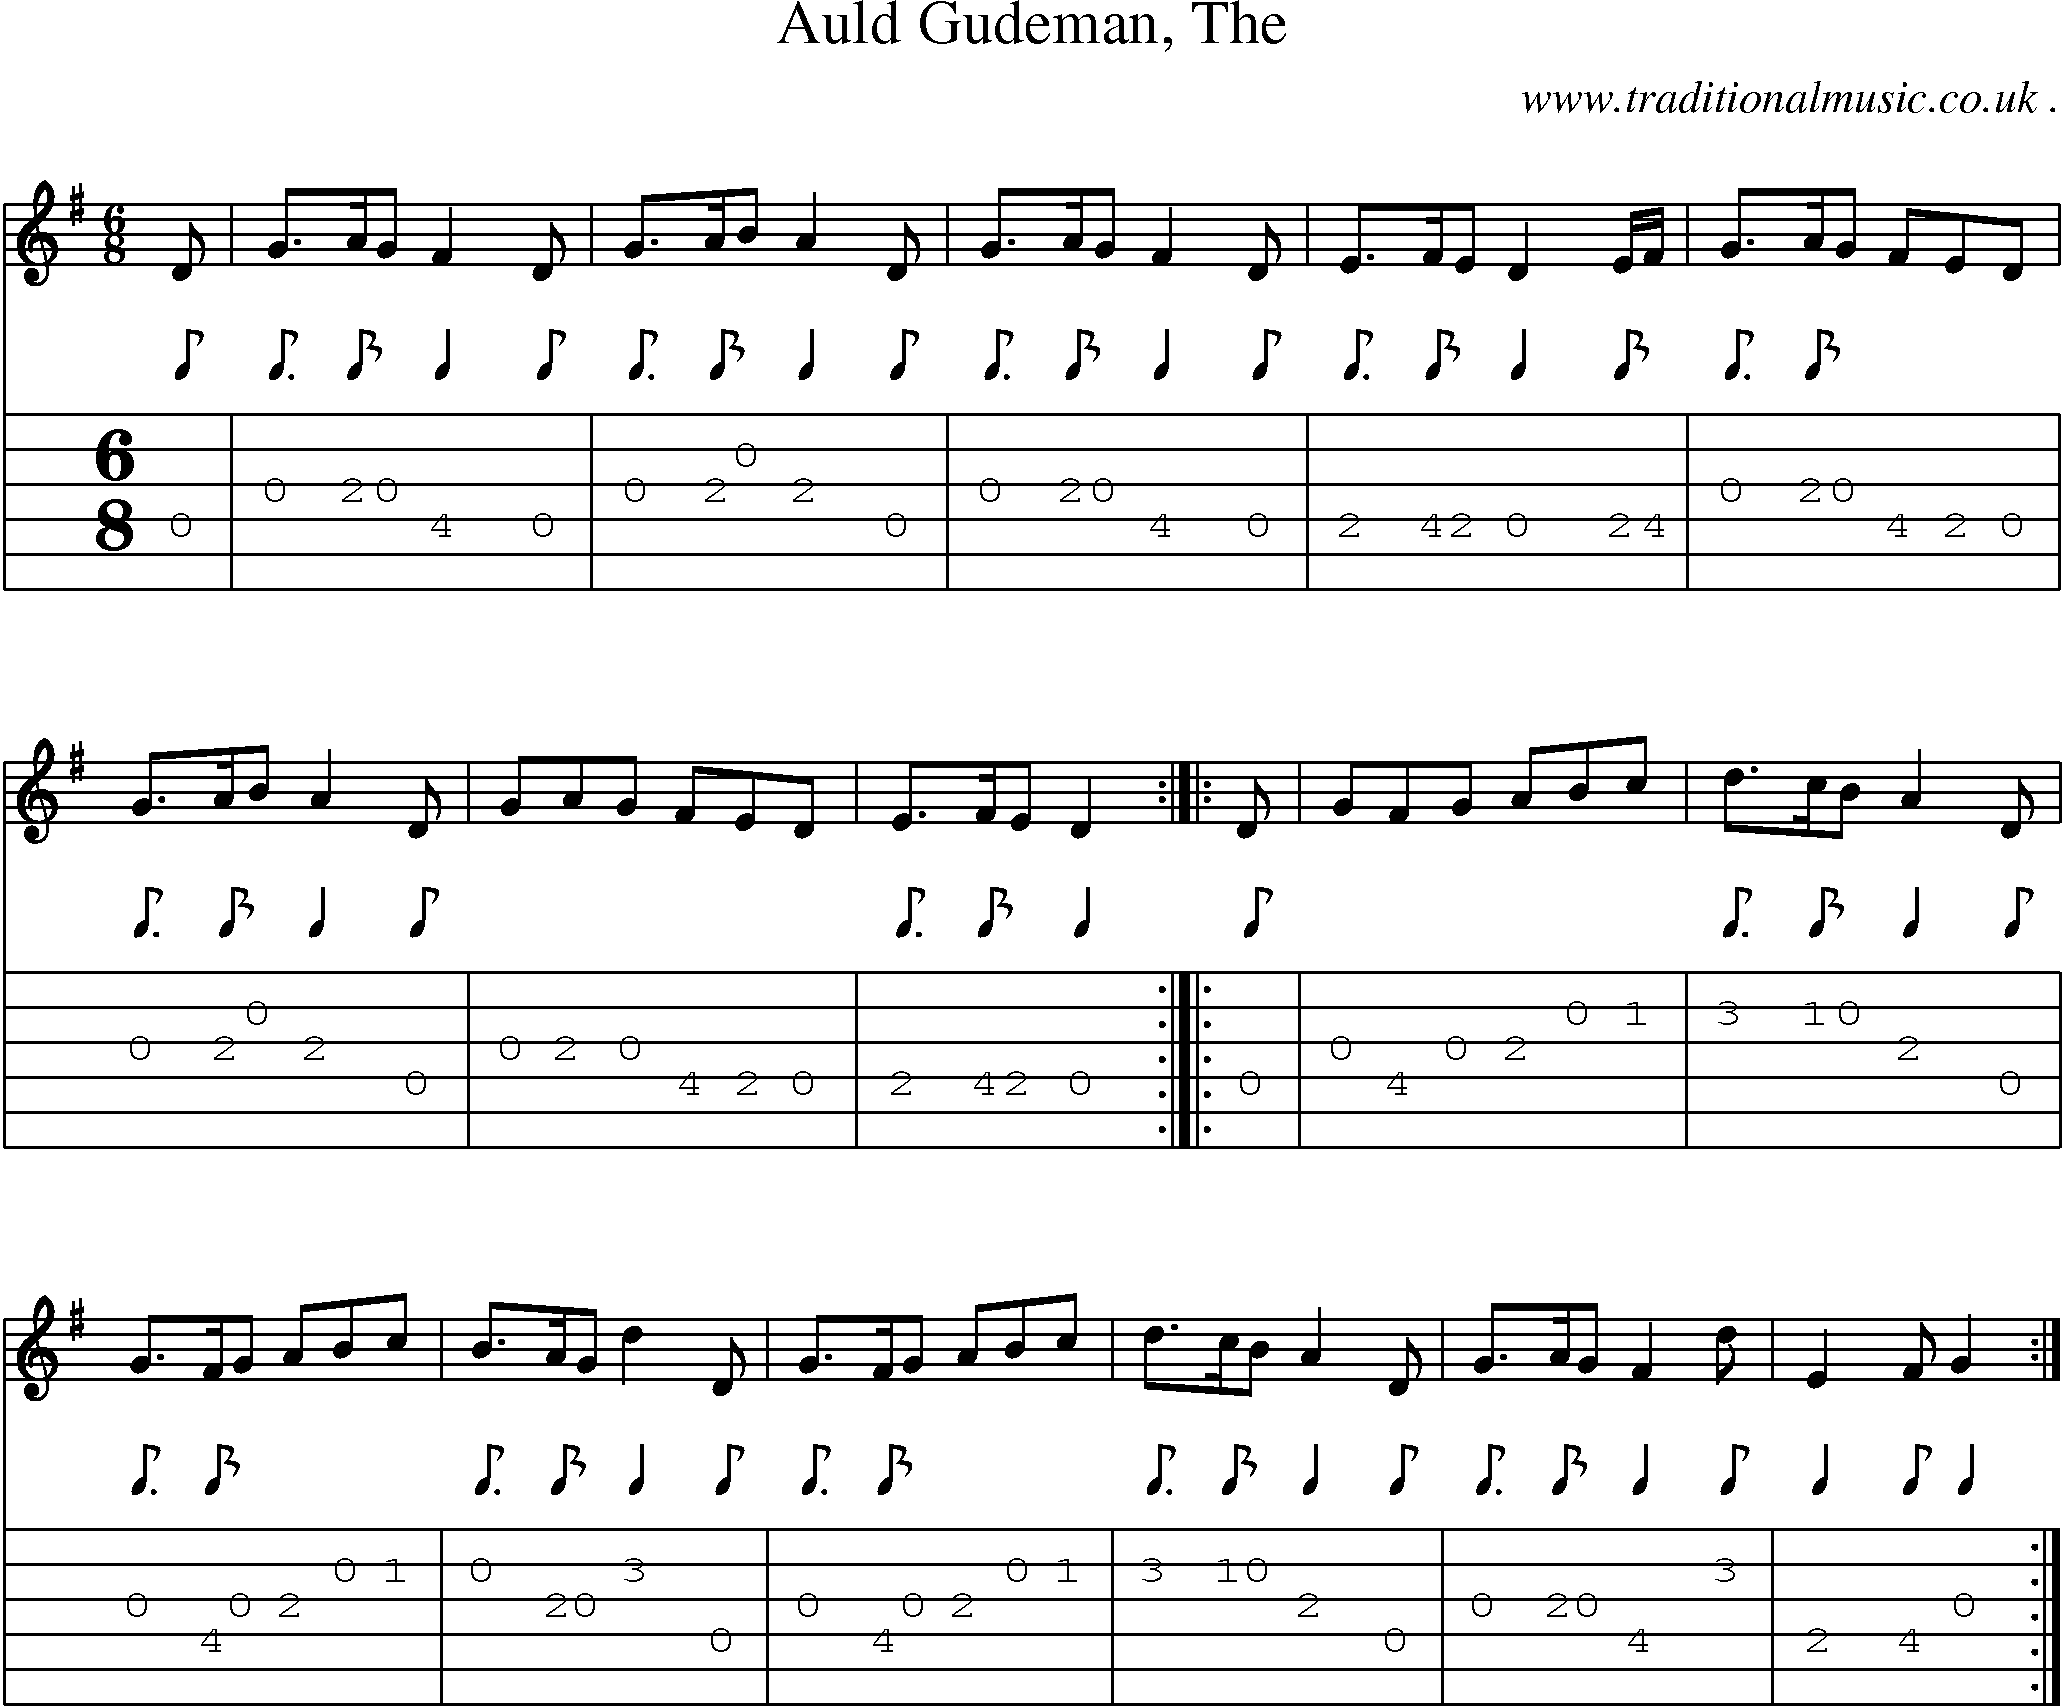 Sheet-music  score, Chords and Guitar Tabs for Auld Gudeman The